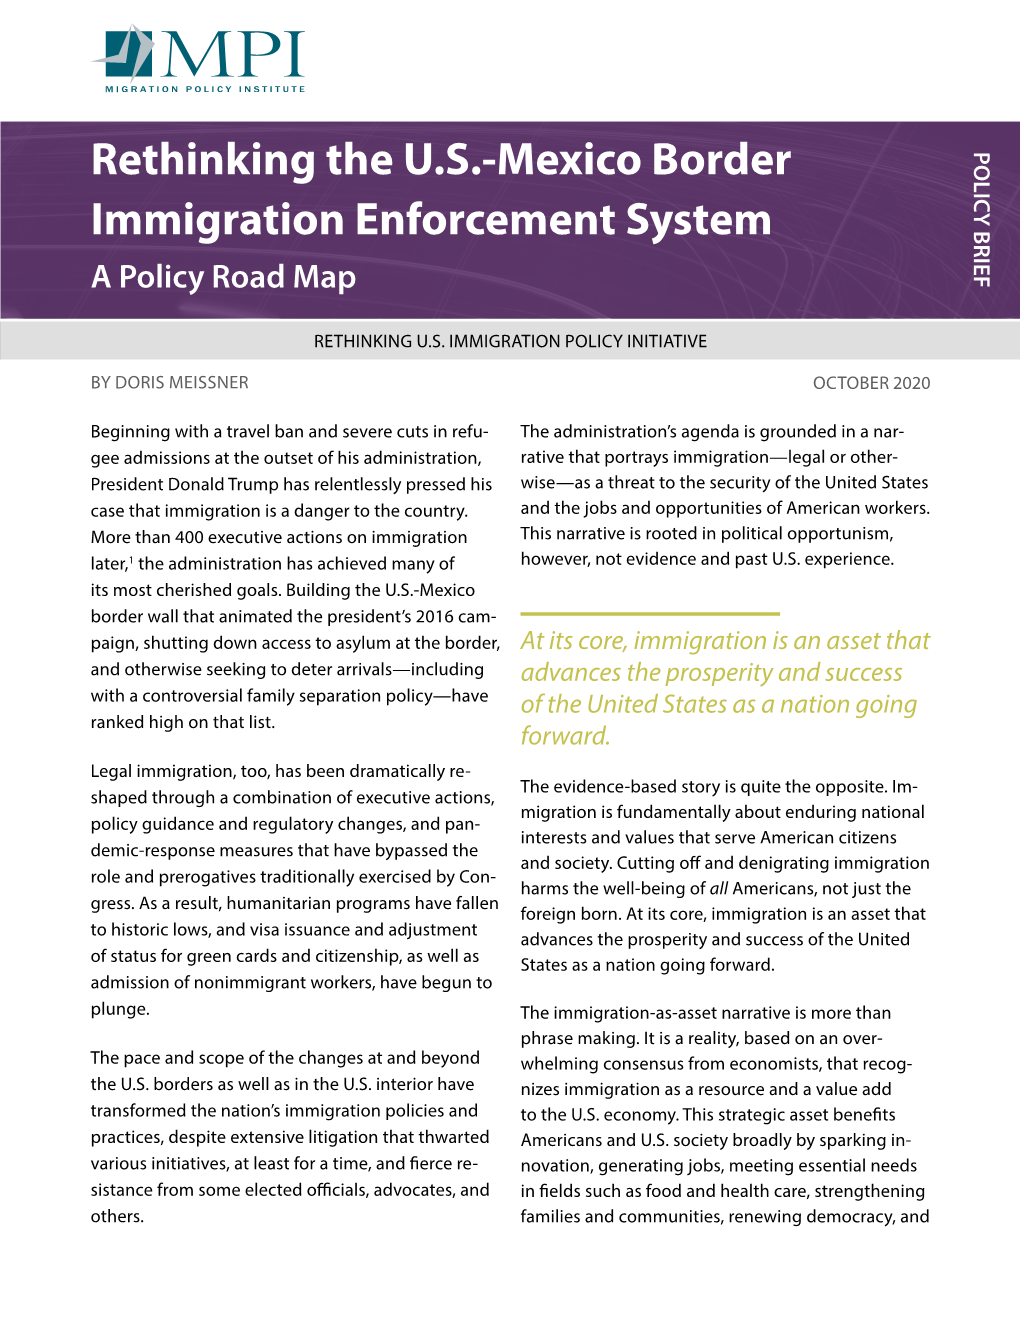 Rethinking the U.S.-Mexico Border Immigration Enforcement System: a Policy Road Map